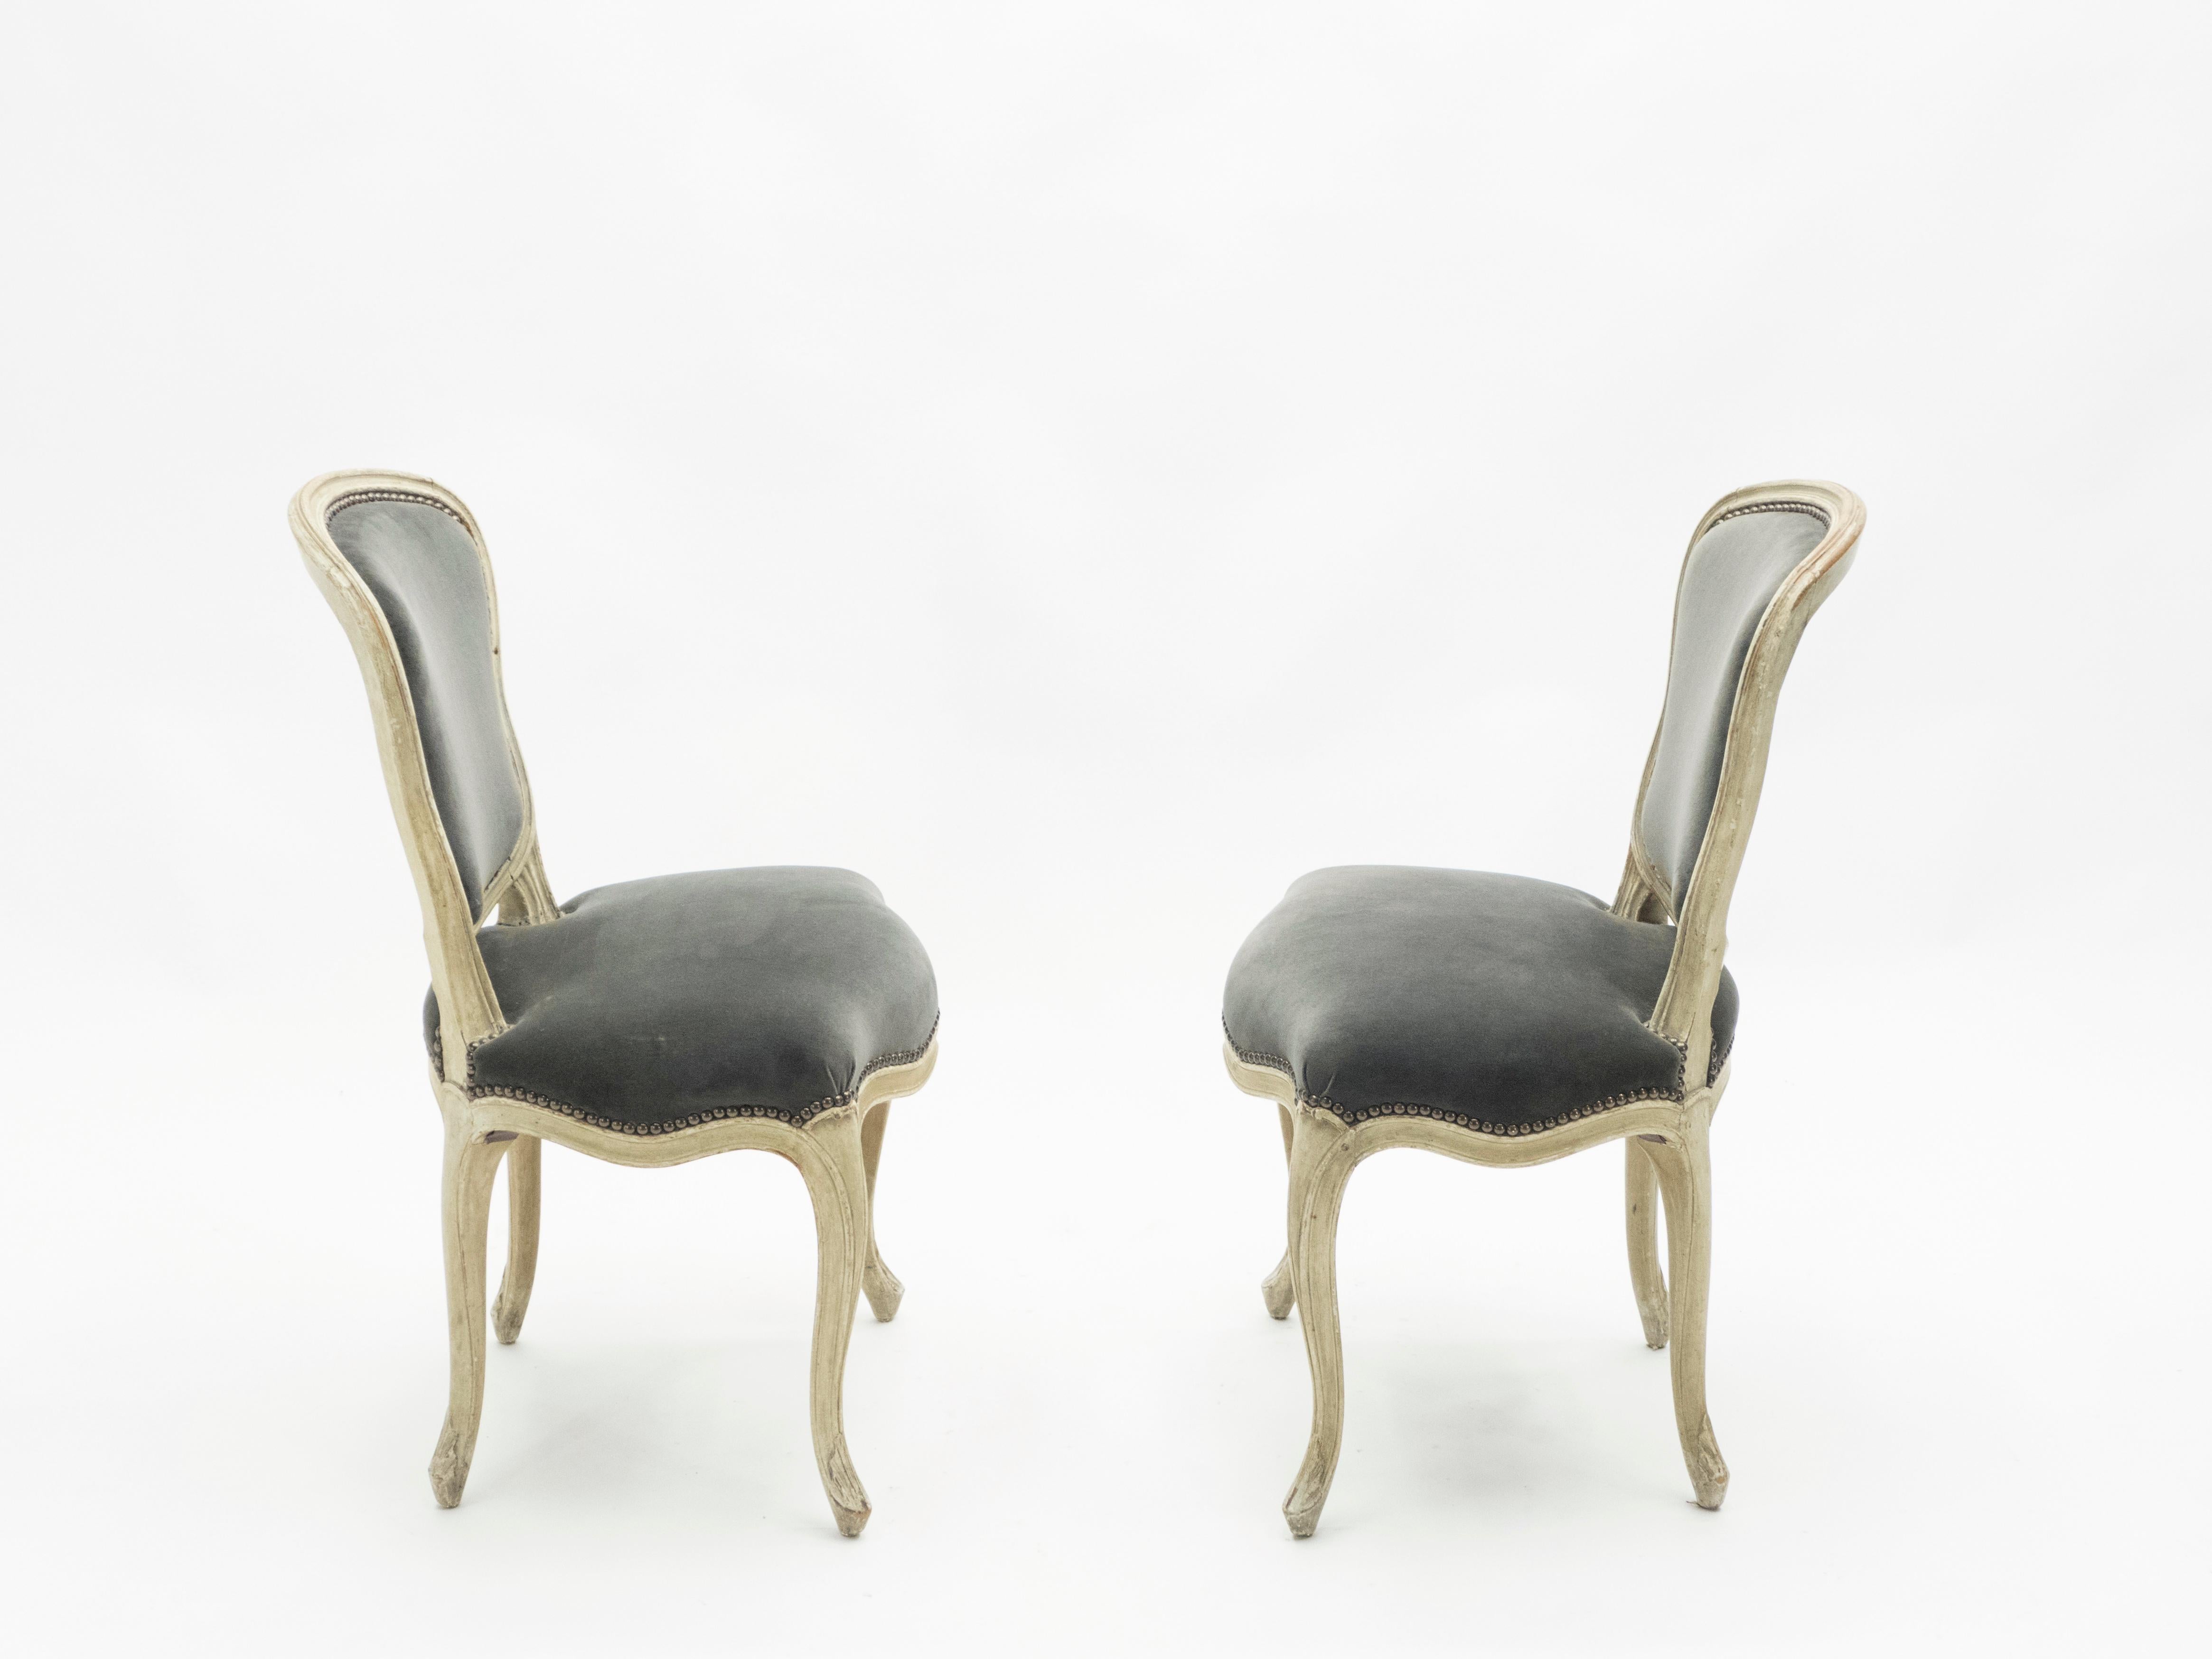 Velvet Rare Pair of Stamped Maison Jansen Louis XV Neoclassical Chairs, 1940s For Sale